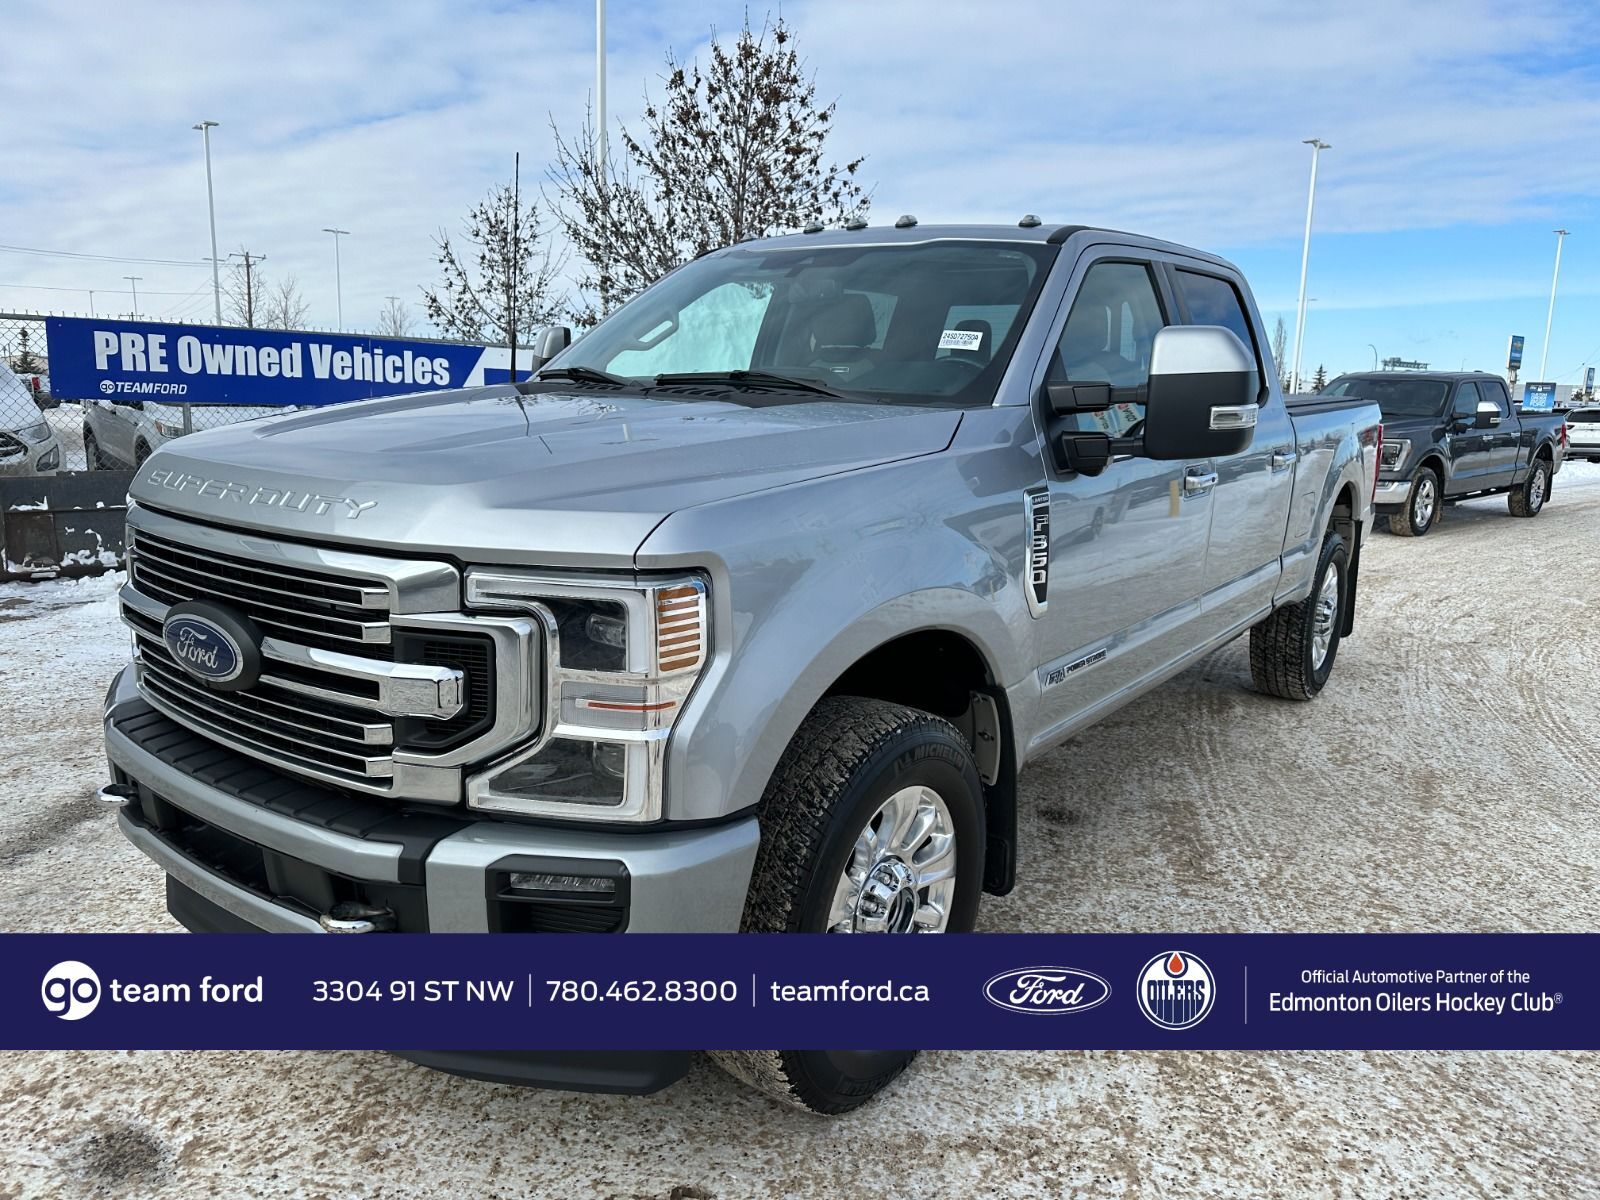 2022 Ford F-350 LIMITED- HEATED RAER SEATS, FX4 PACKAGE, SYNC 3, H